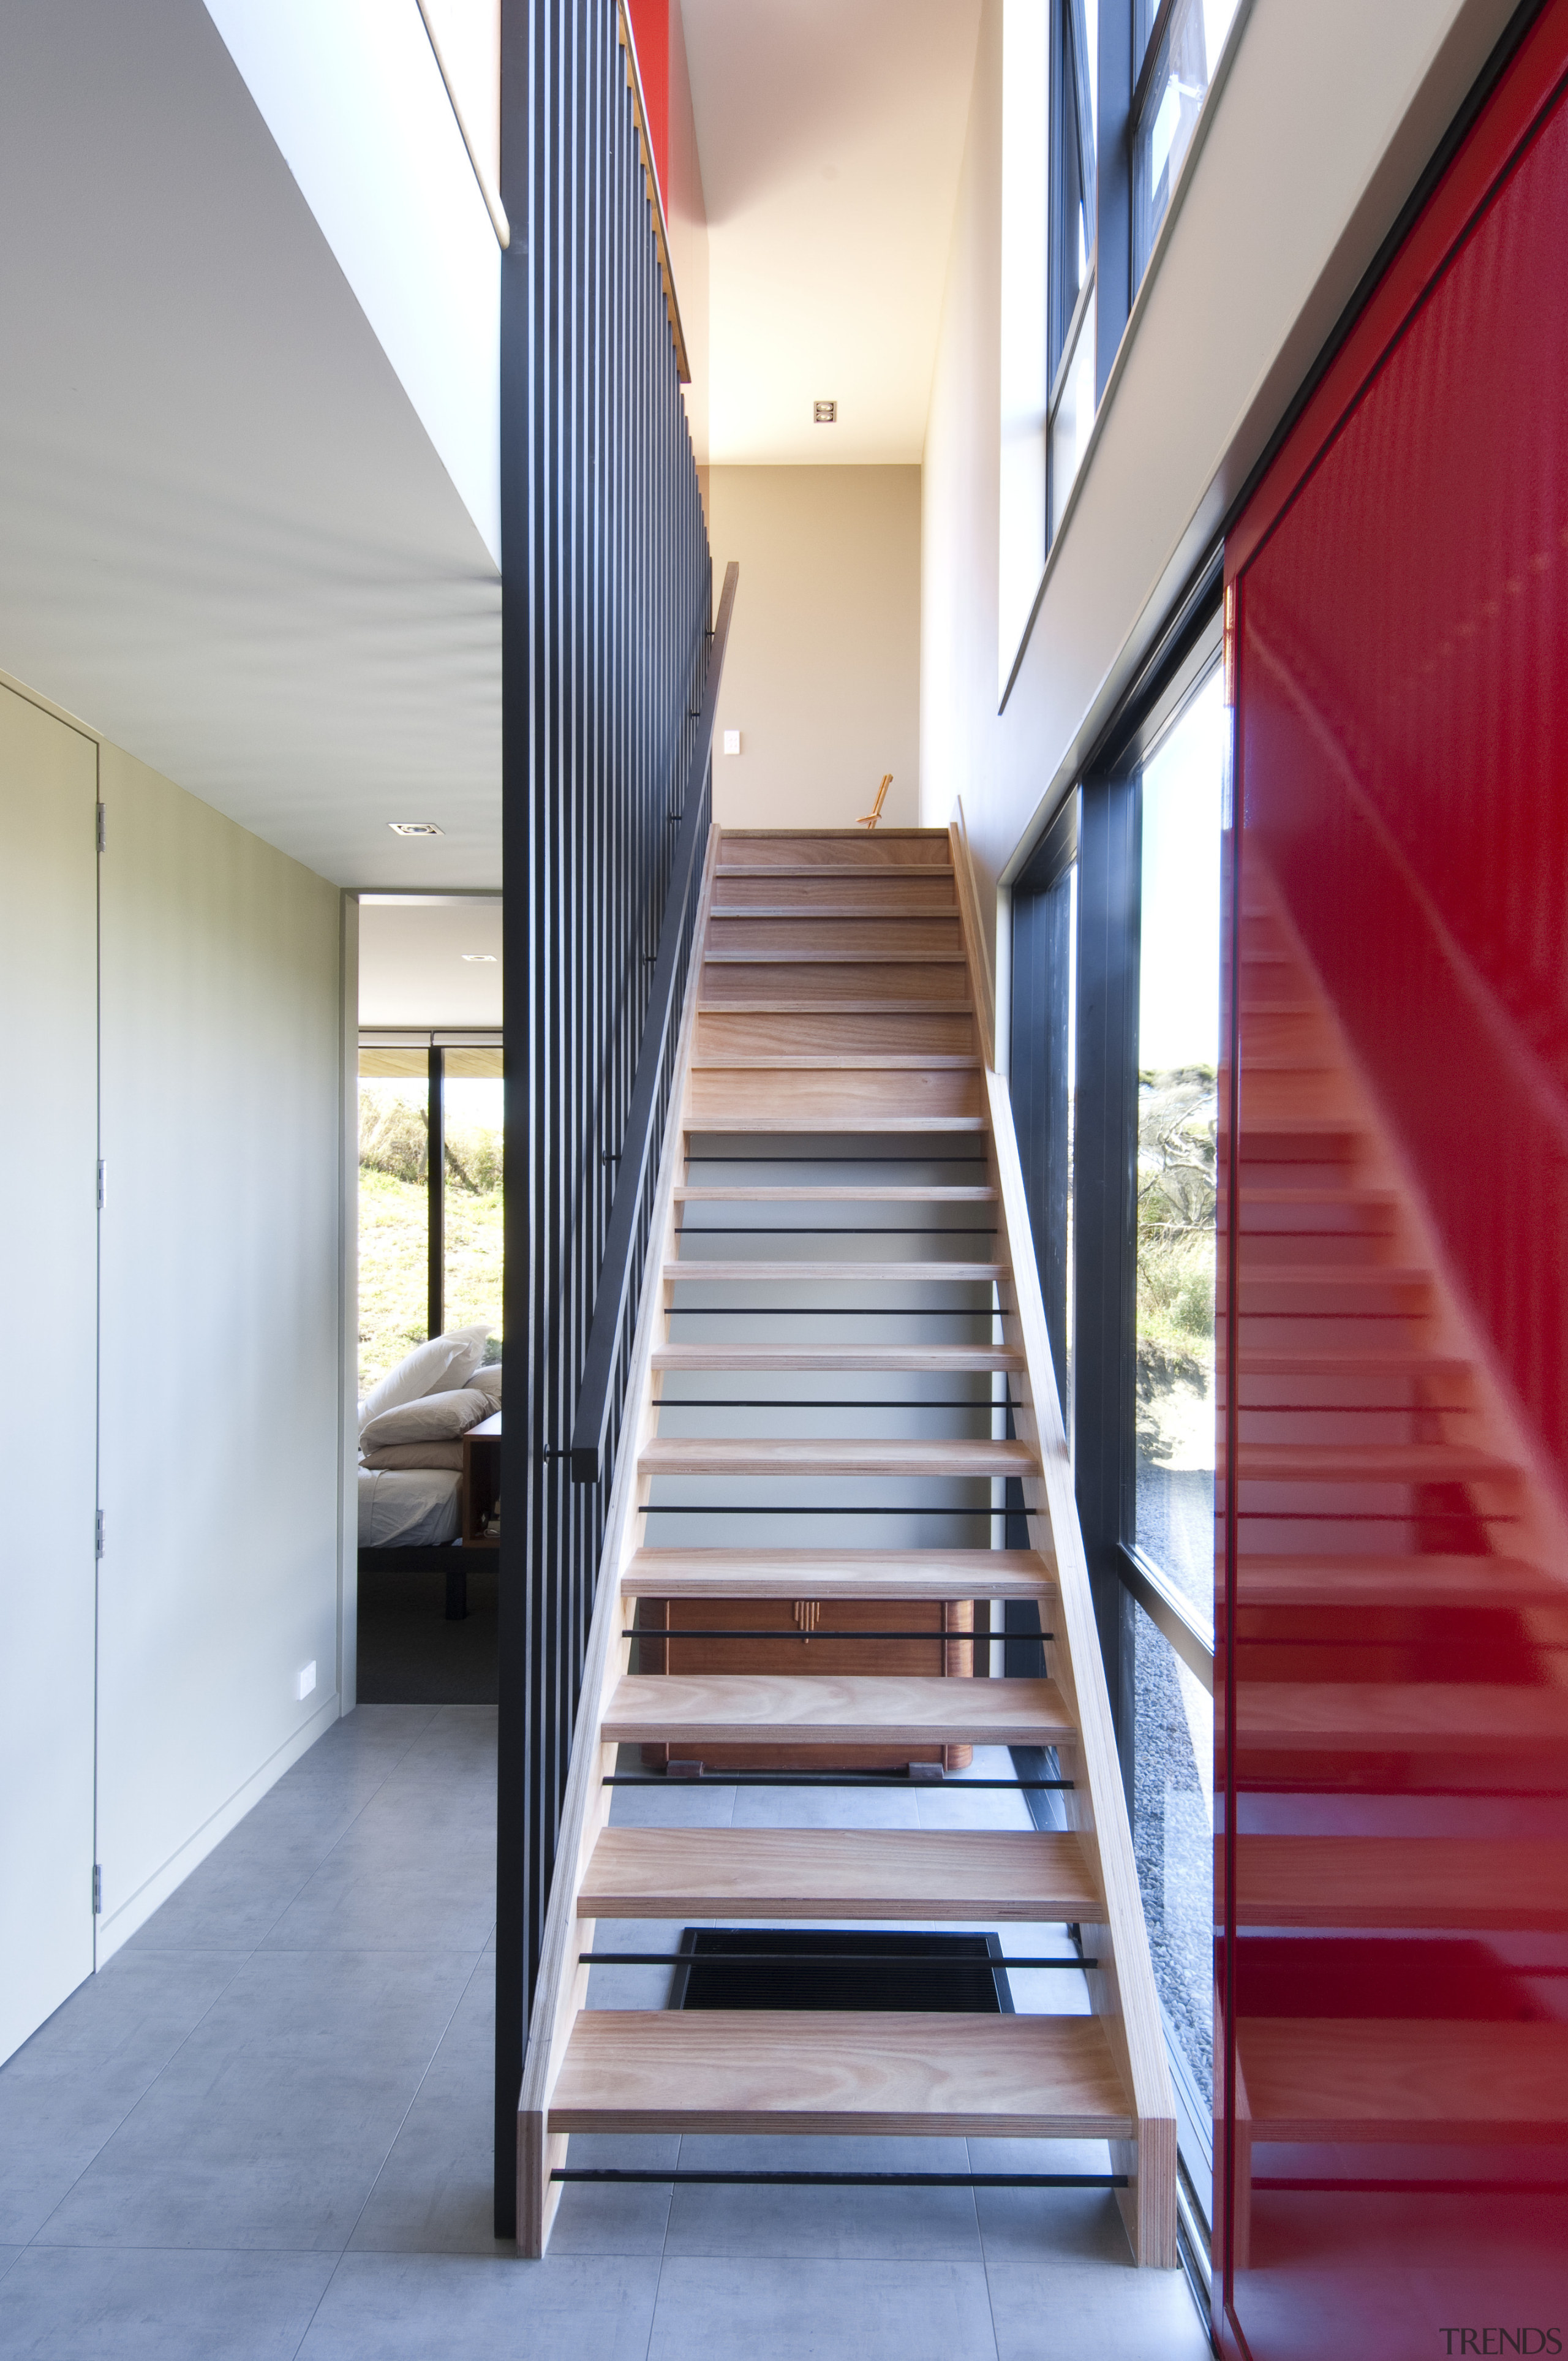 View of stairway with red wall. - View architecture, daylighting, floor, handrail, house, interior design, stairs, white, gray